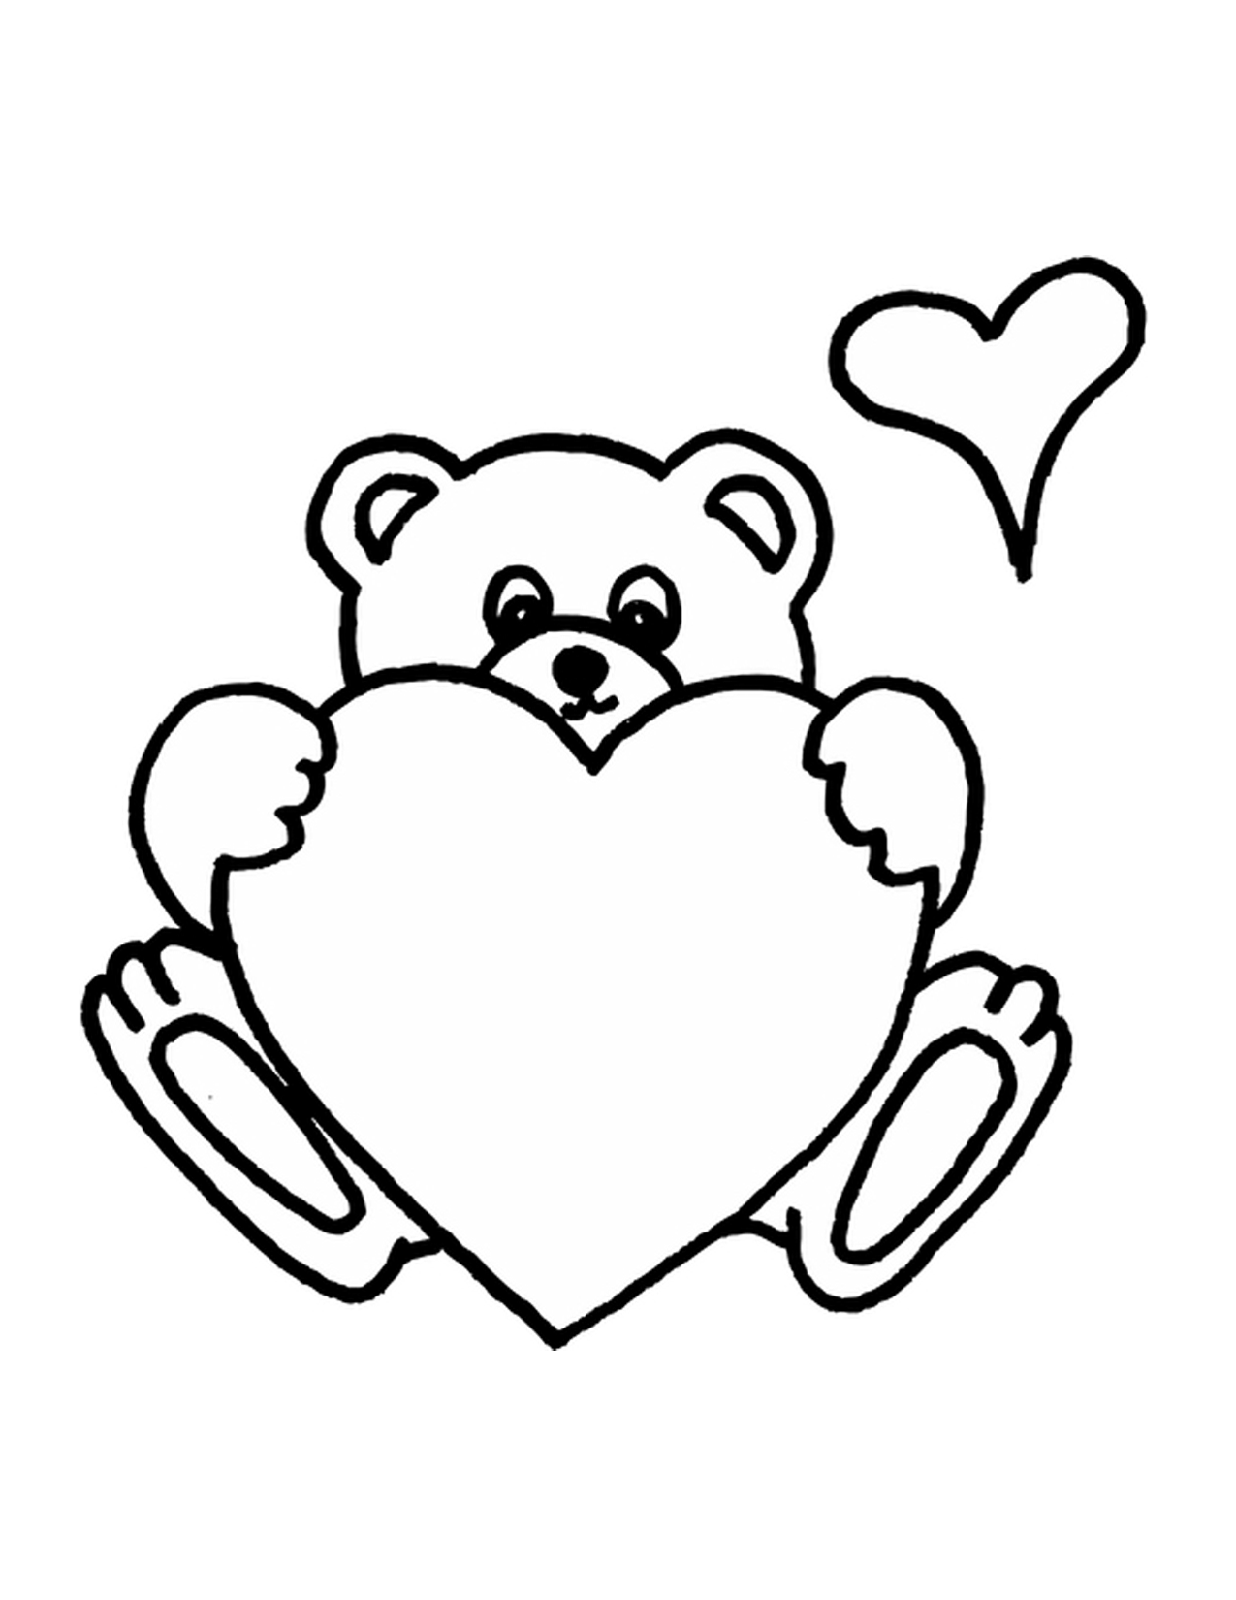 Cute Bear with Heart Coloring Page (Page 1) - Line.17QQ.com